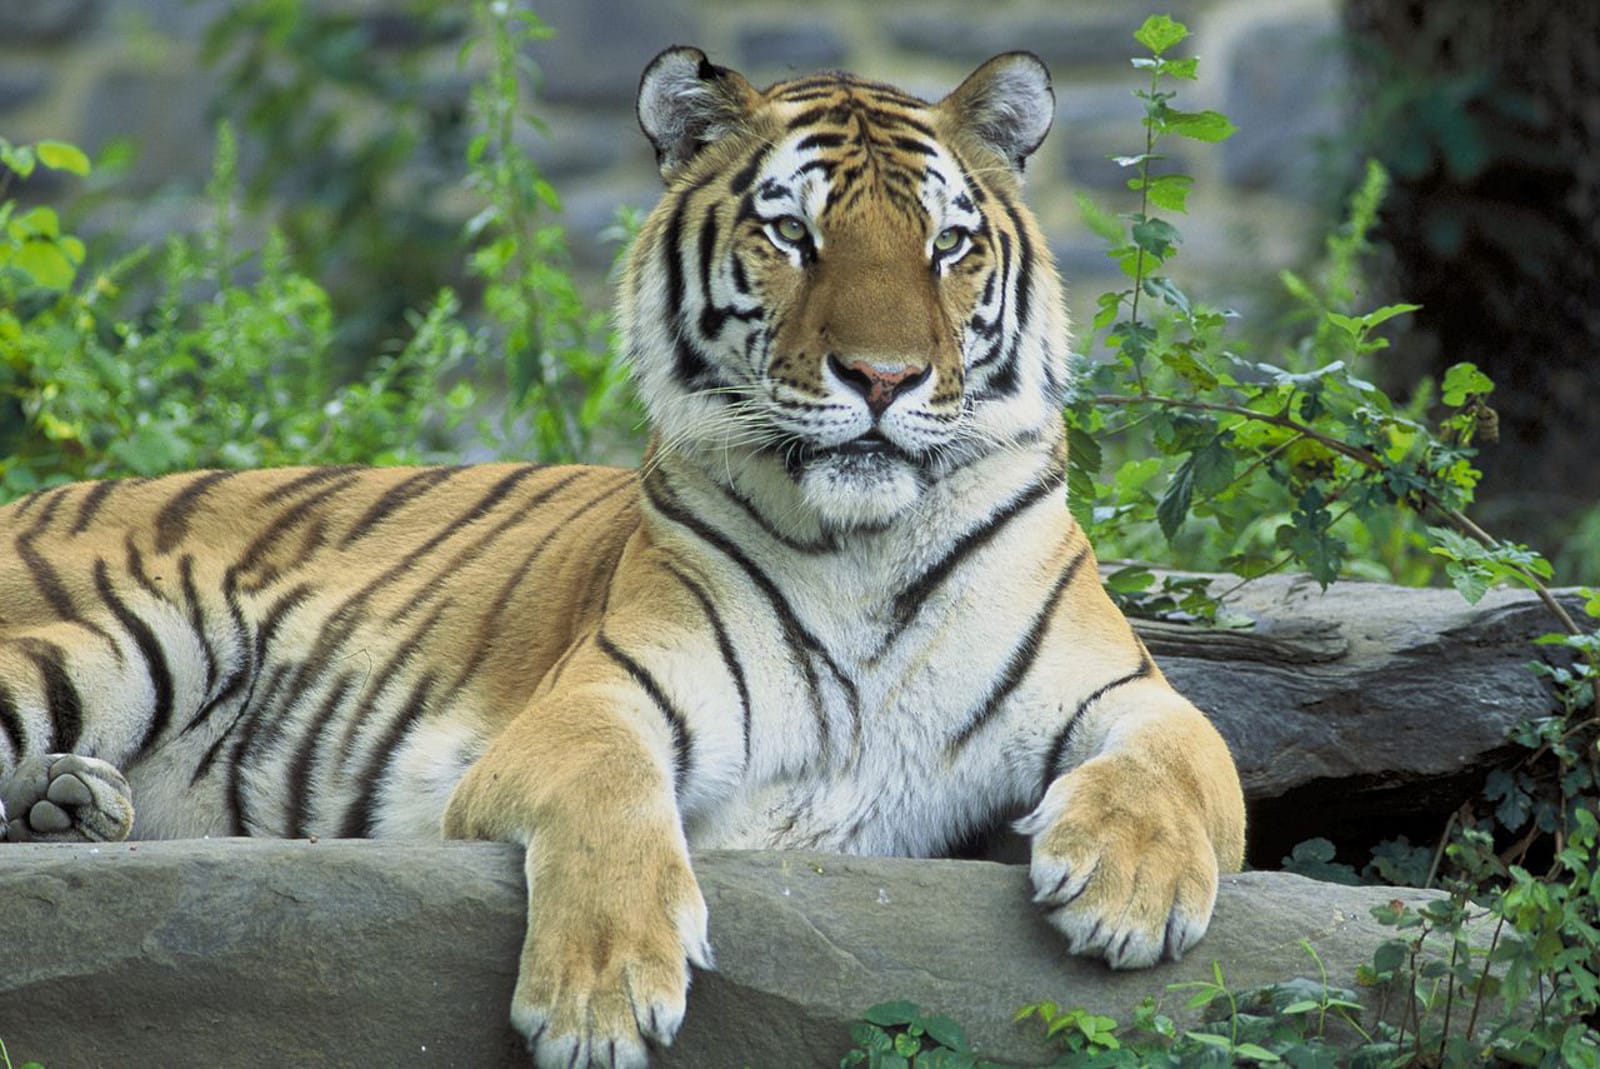 Where Are the World's Tigers?